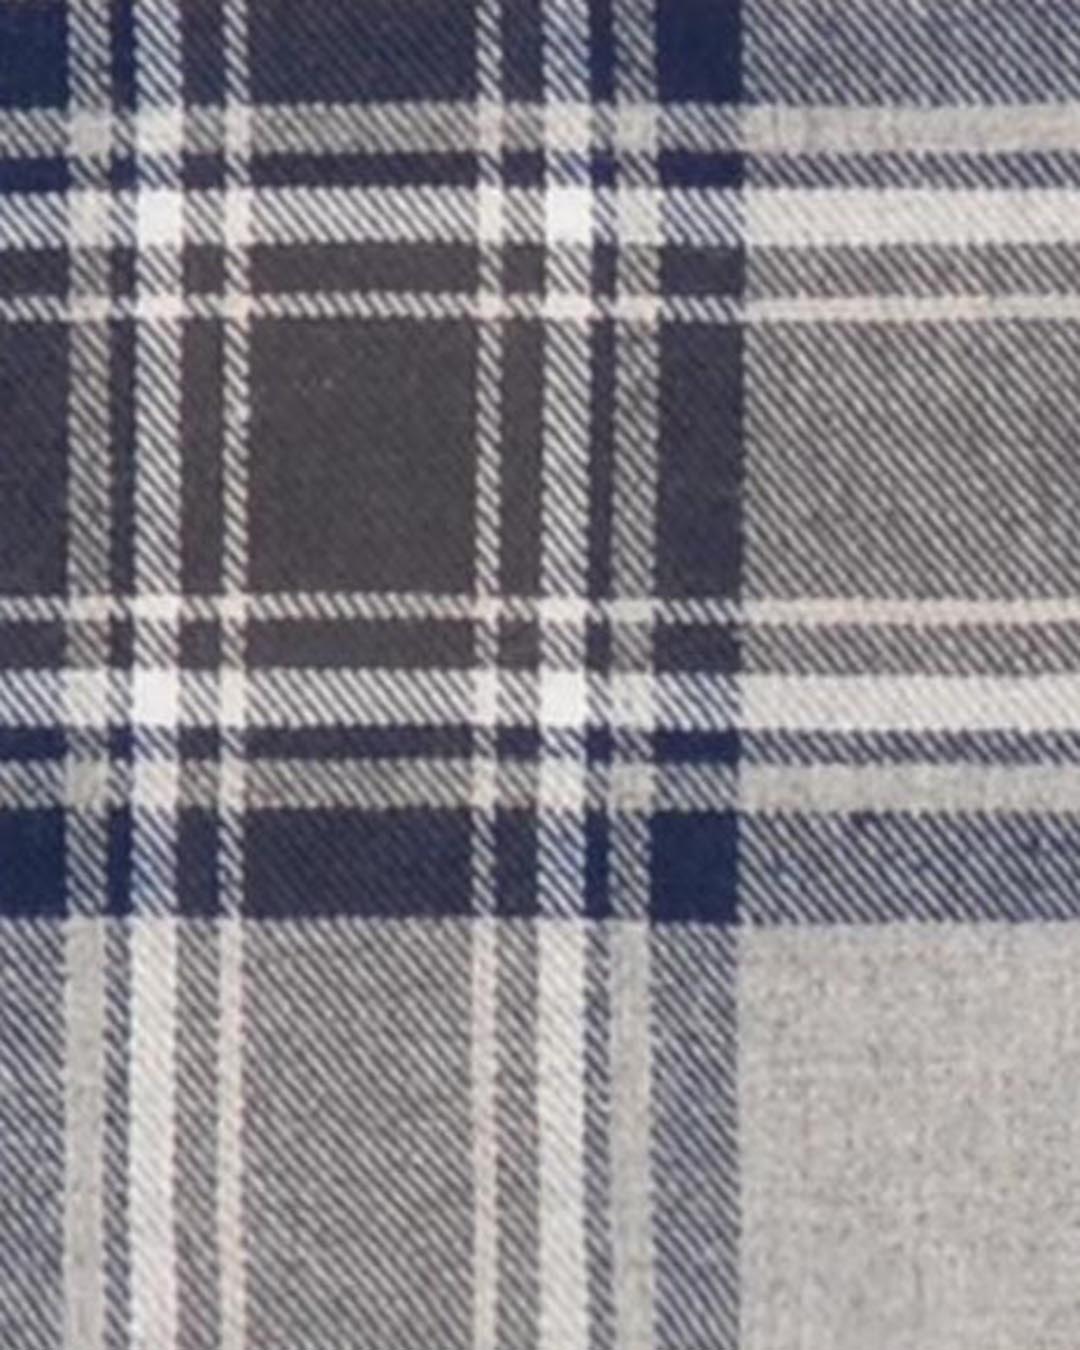 Close up view of custom check shirts for men by Luxire dark gull grey and navy